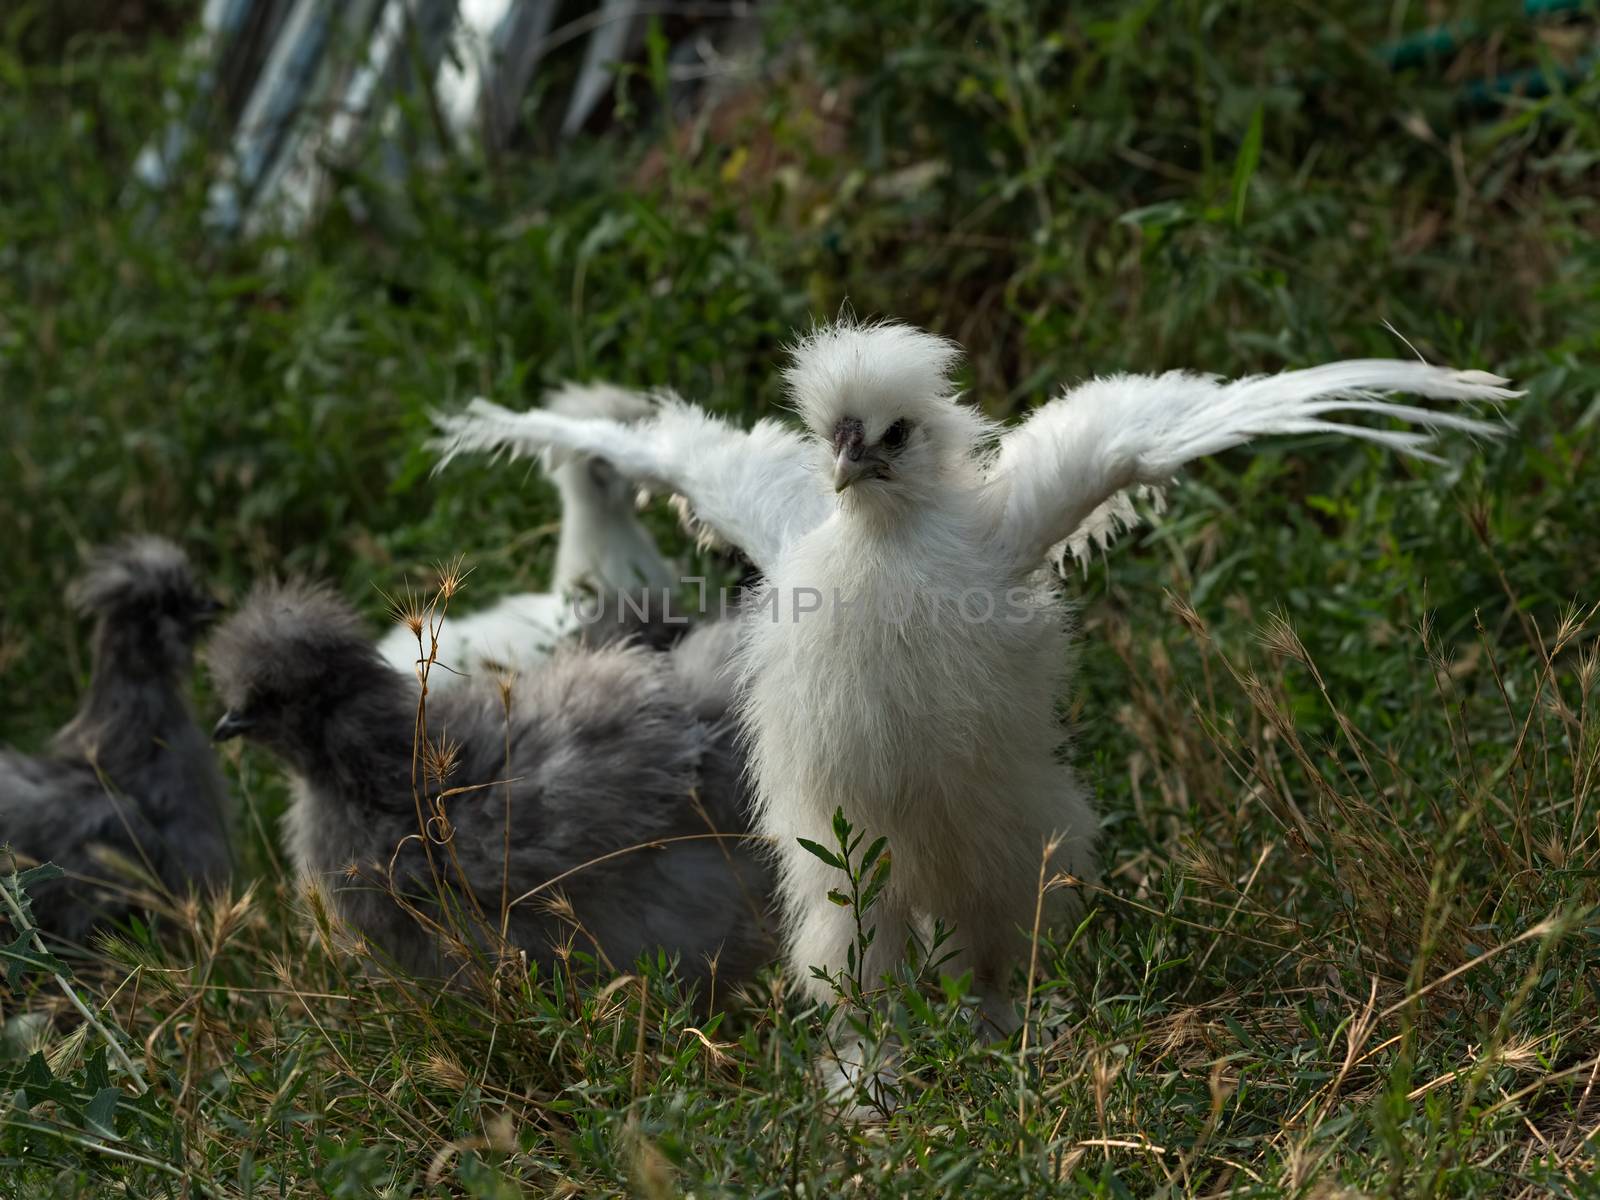 White fluffy chick - young rooster silkie chicken at the age of 3 months - spread its wings and trying to fly. Selective focus shot outside in natural light.